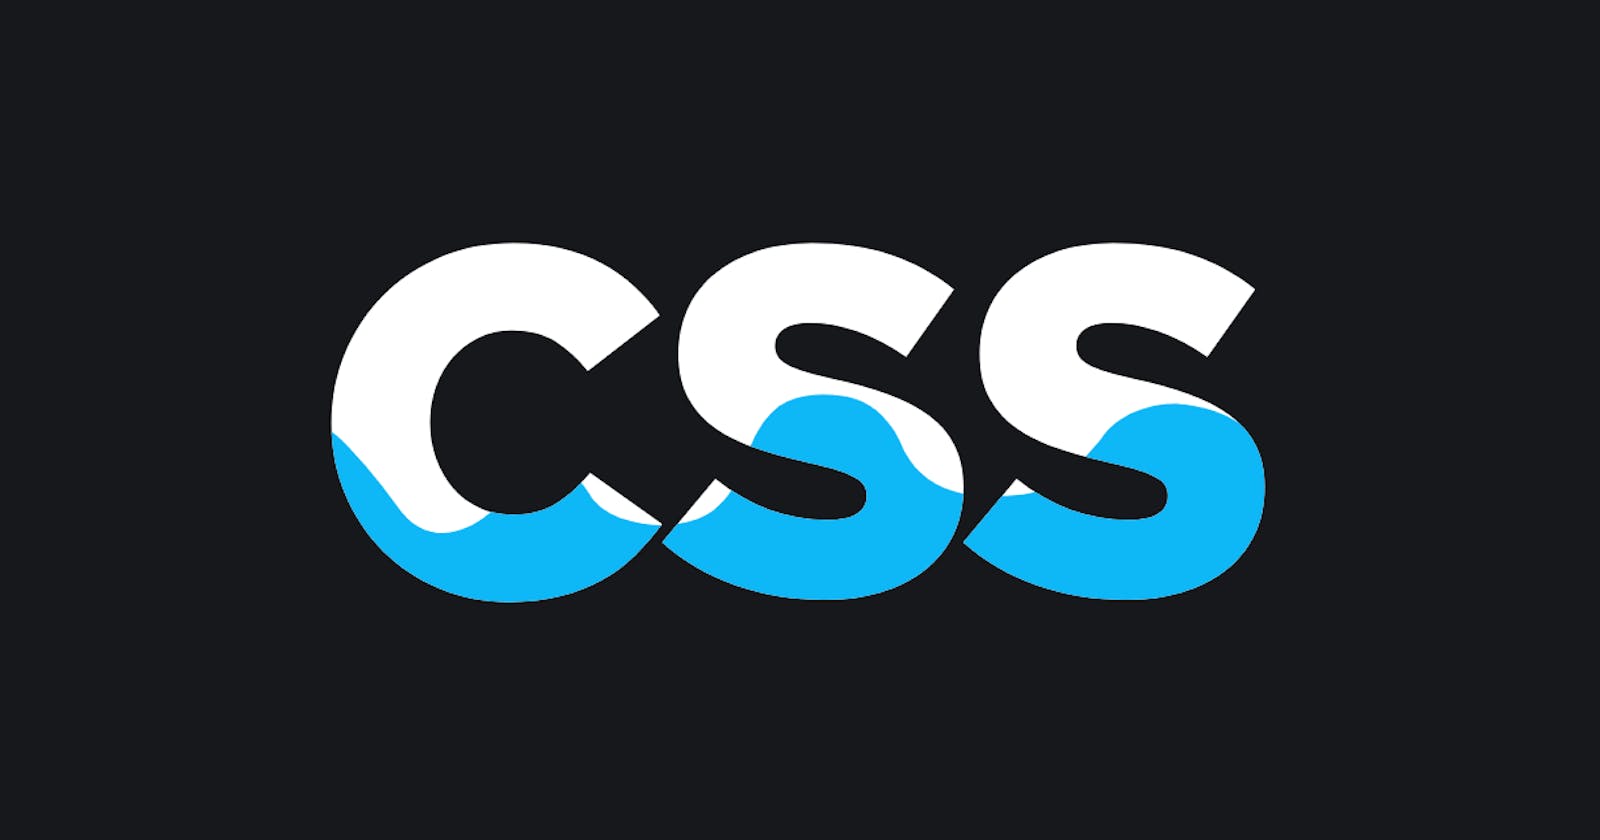 CSS For Beginners (Cascading Style Sheets)